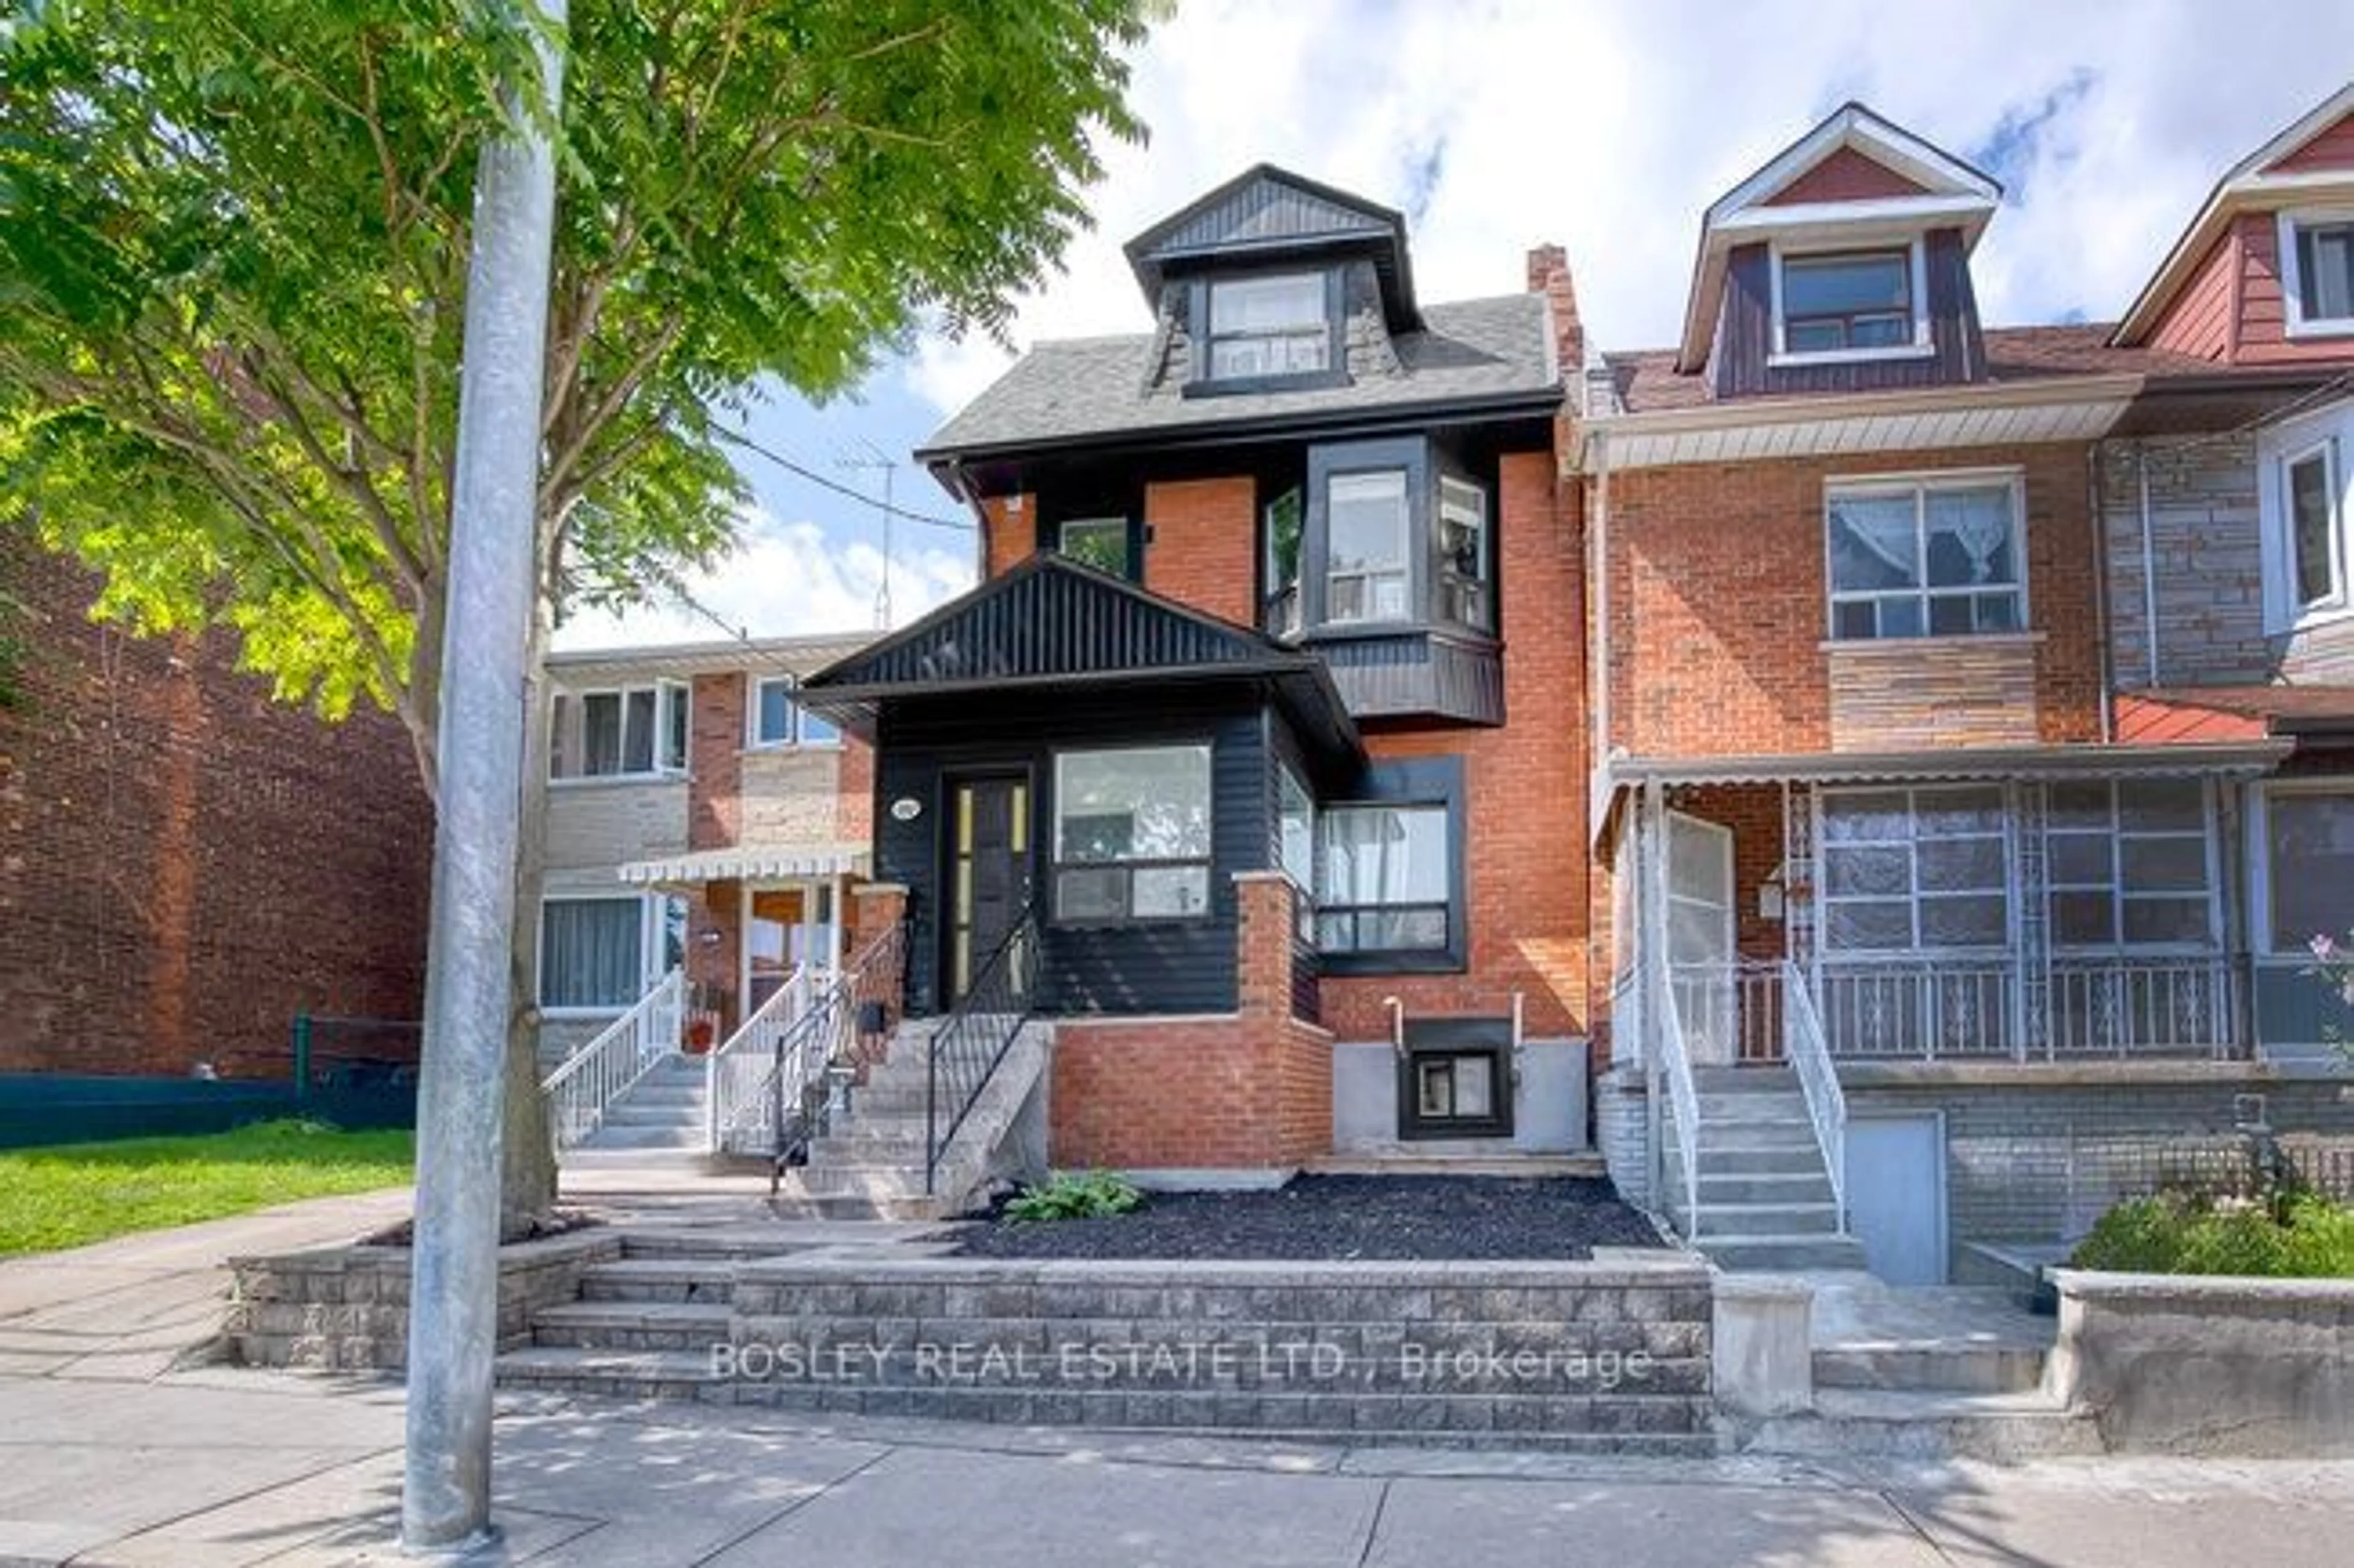 A pic from exterior of the house or condo for 282 Ossington Ave, Toronto Ontario M6H 2W6